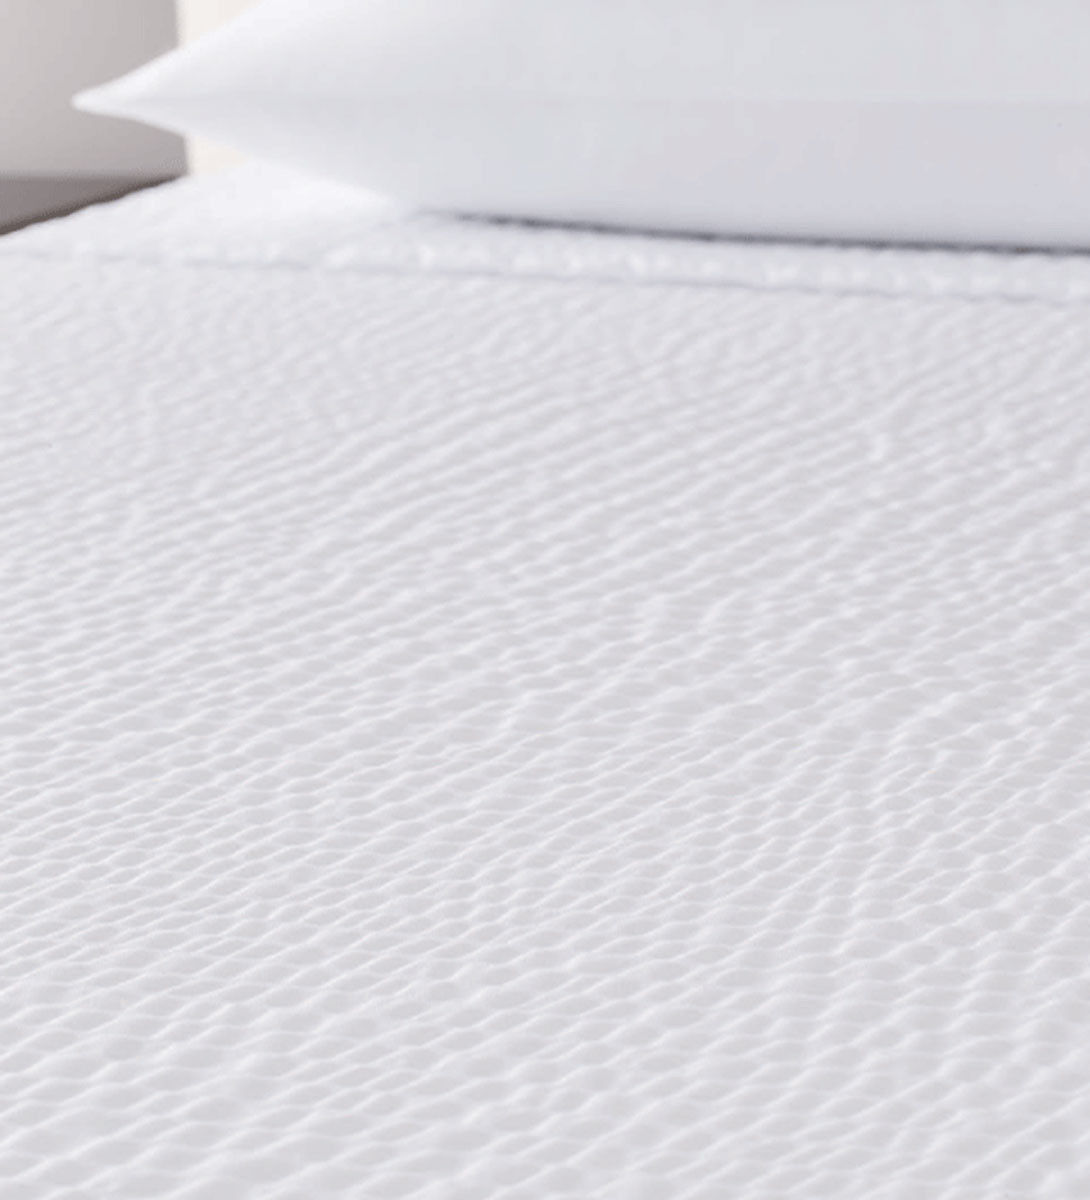 Is the fabric of Cumulus Standard Textile soft for lasting performance?